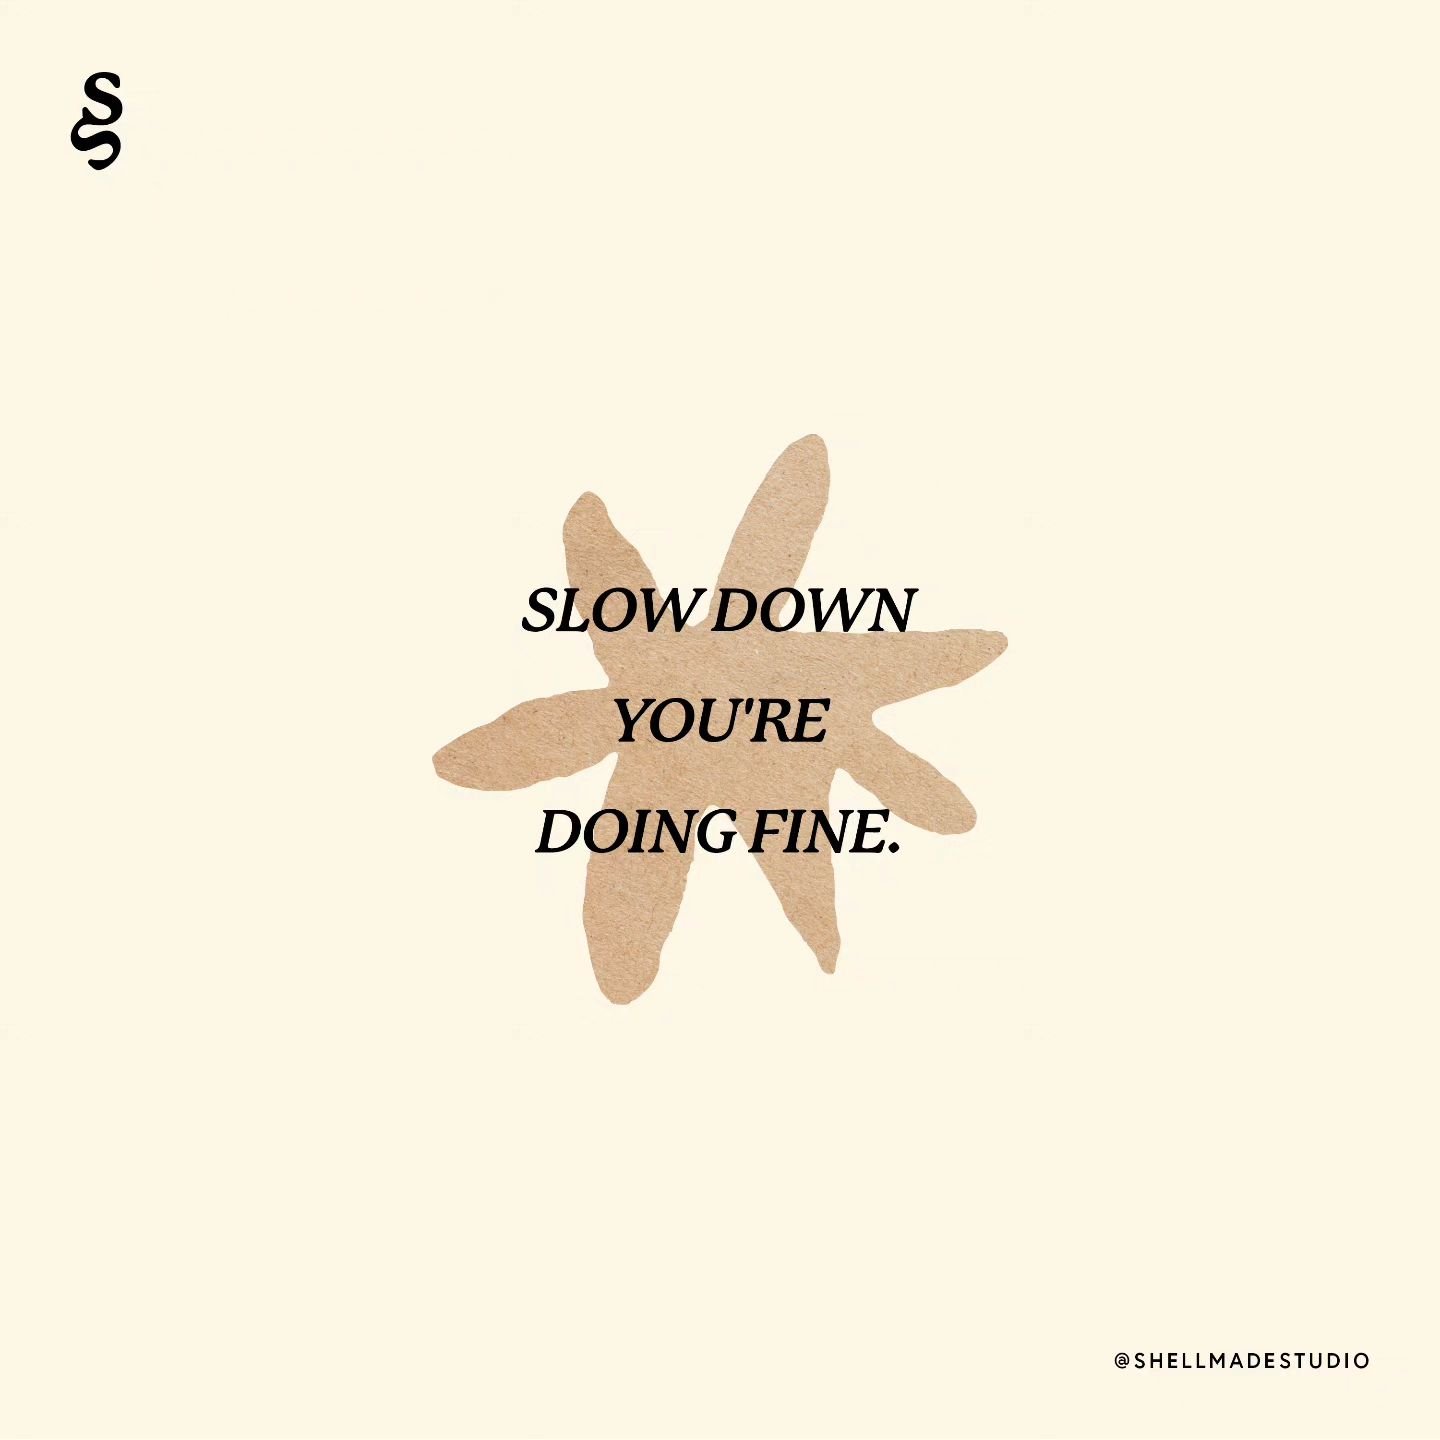 Slowing down isn't easy when I am on a roll, so I sometimes need a little reminder like this 🙌

Who can relate? 😍

#slowdown #graphicdesign #workload #letsdoeverything #fastpaced #working #balance #workbalance #flexibility #graphicdesign #slowlife 